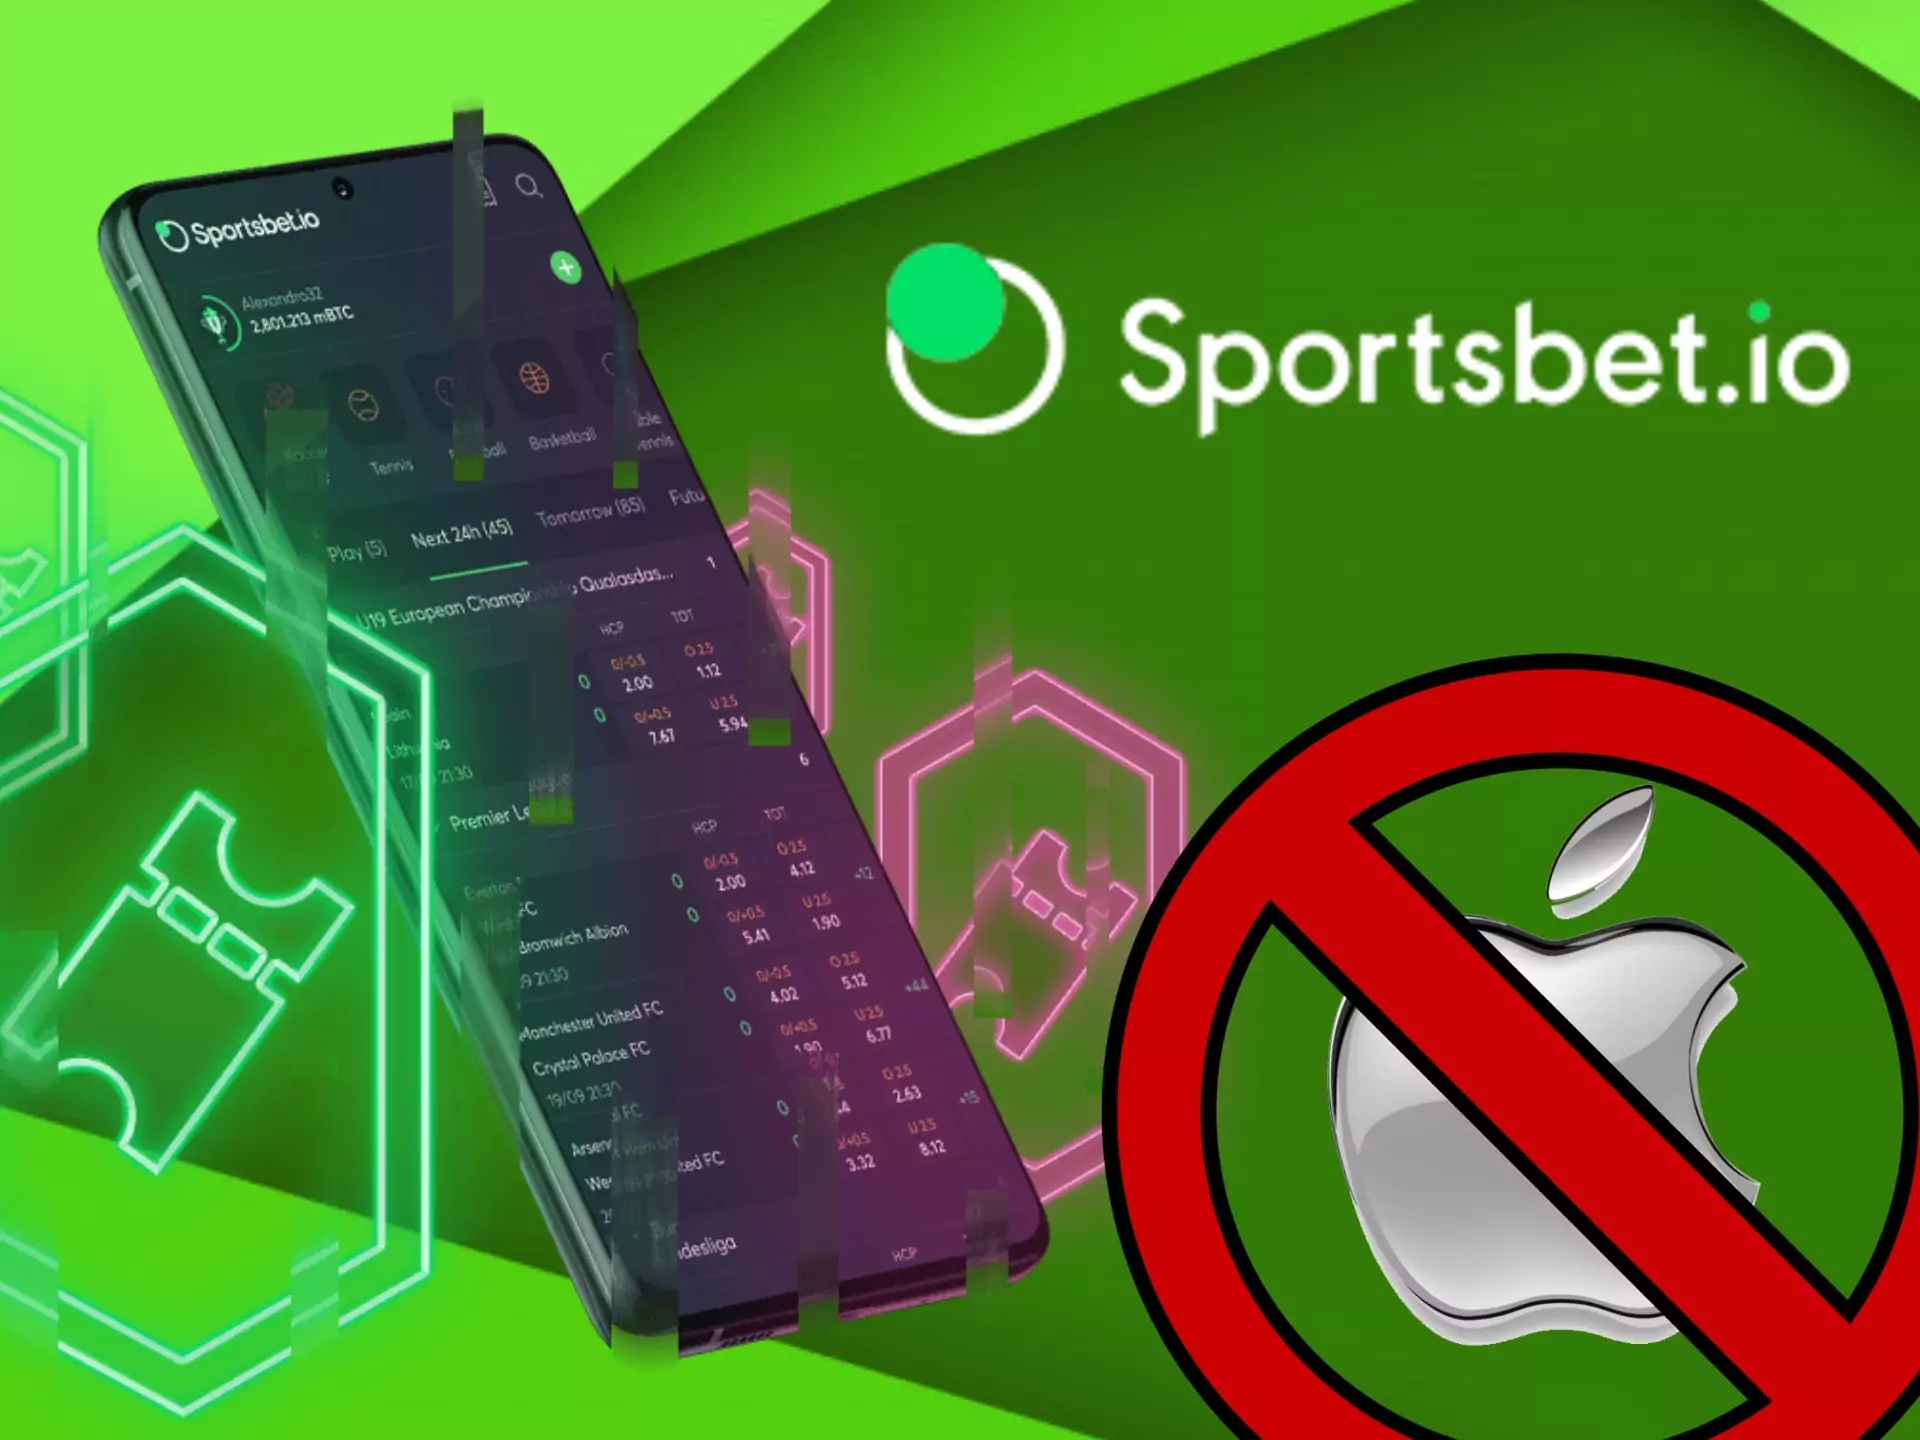 Sportbet.io app for iOS is now not available and you should use mobile version.